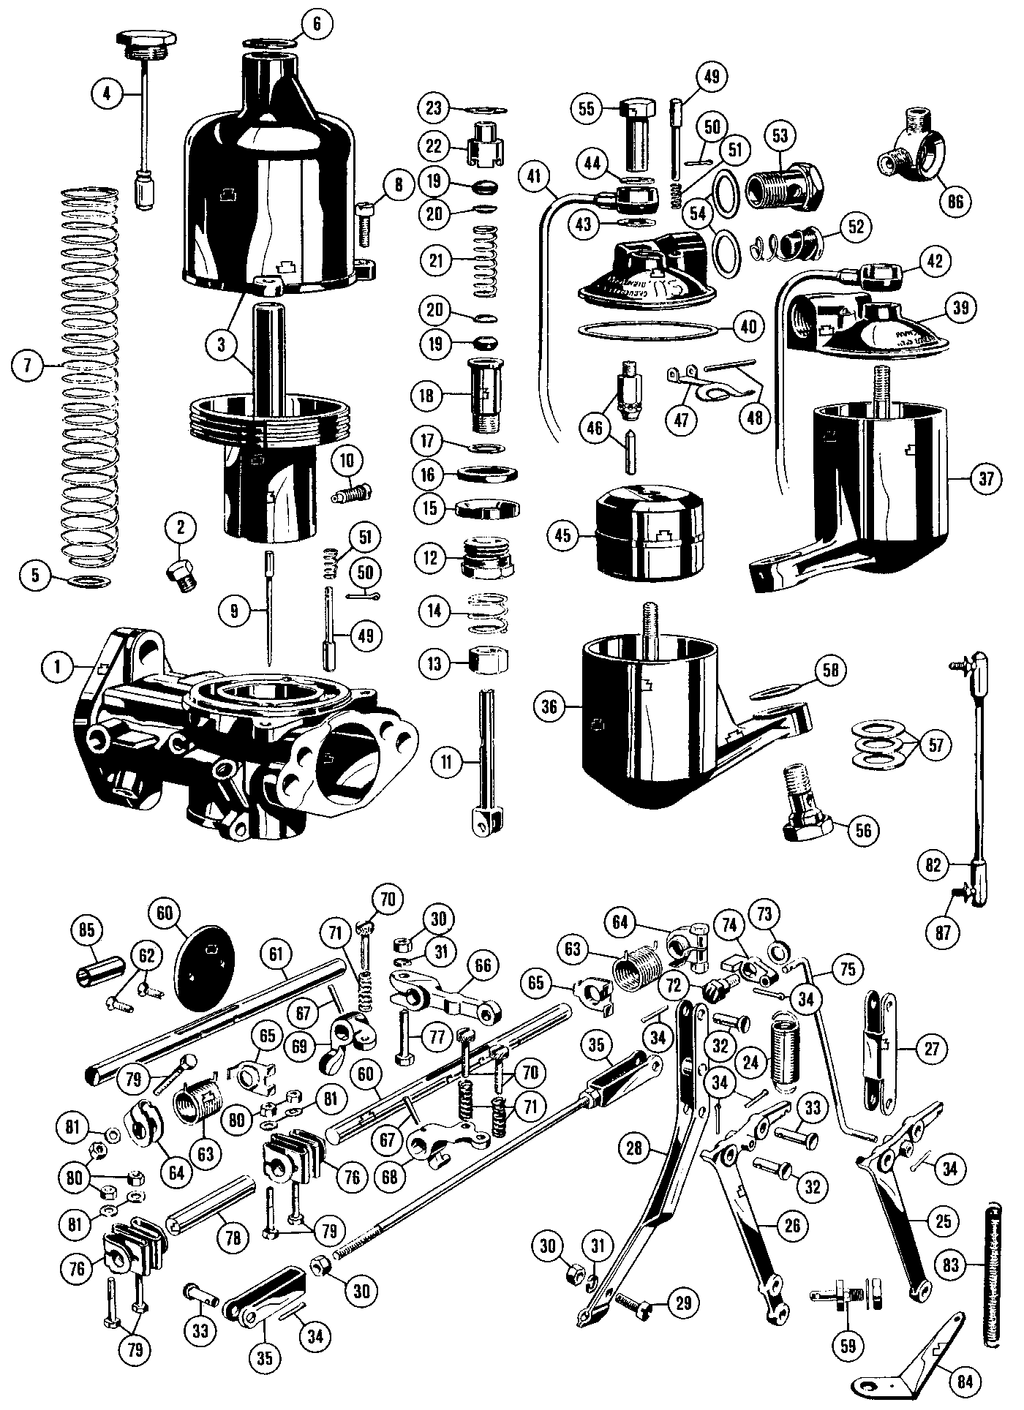 MGTD-TF 1949-1955 - Throttle bodies | Webshop Anglo Parts - 1